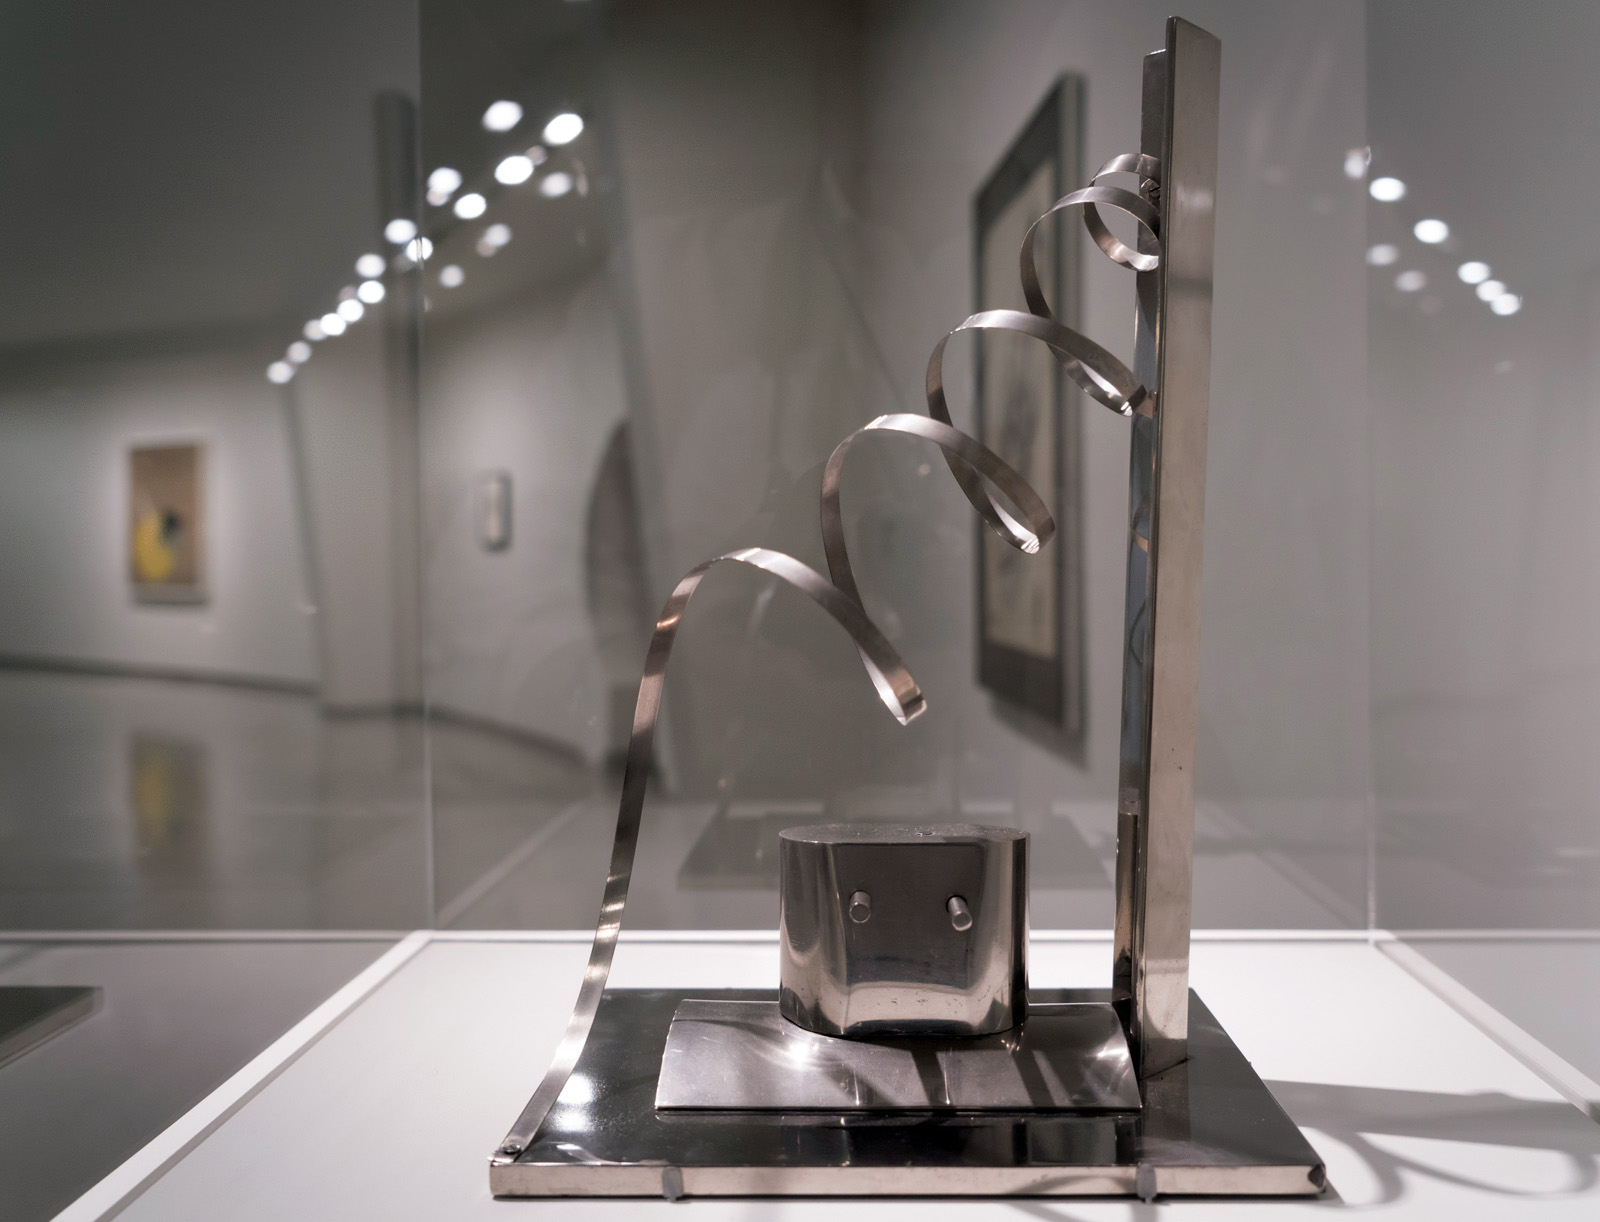 László Moholy-Nagy (Hungarian, 1895-1946) 'Nickel Sculpture with Spiral' 1921 (installation photograph)